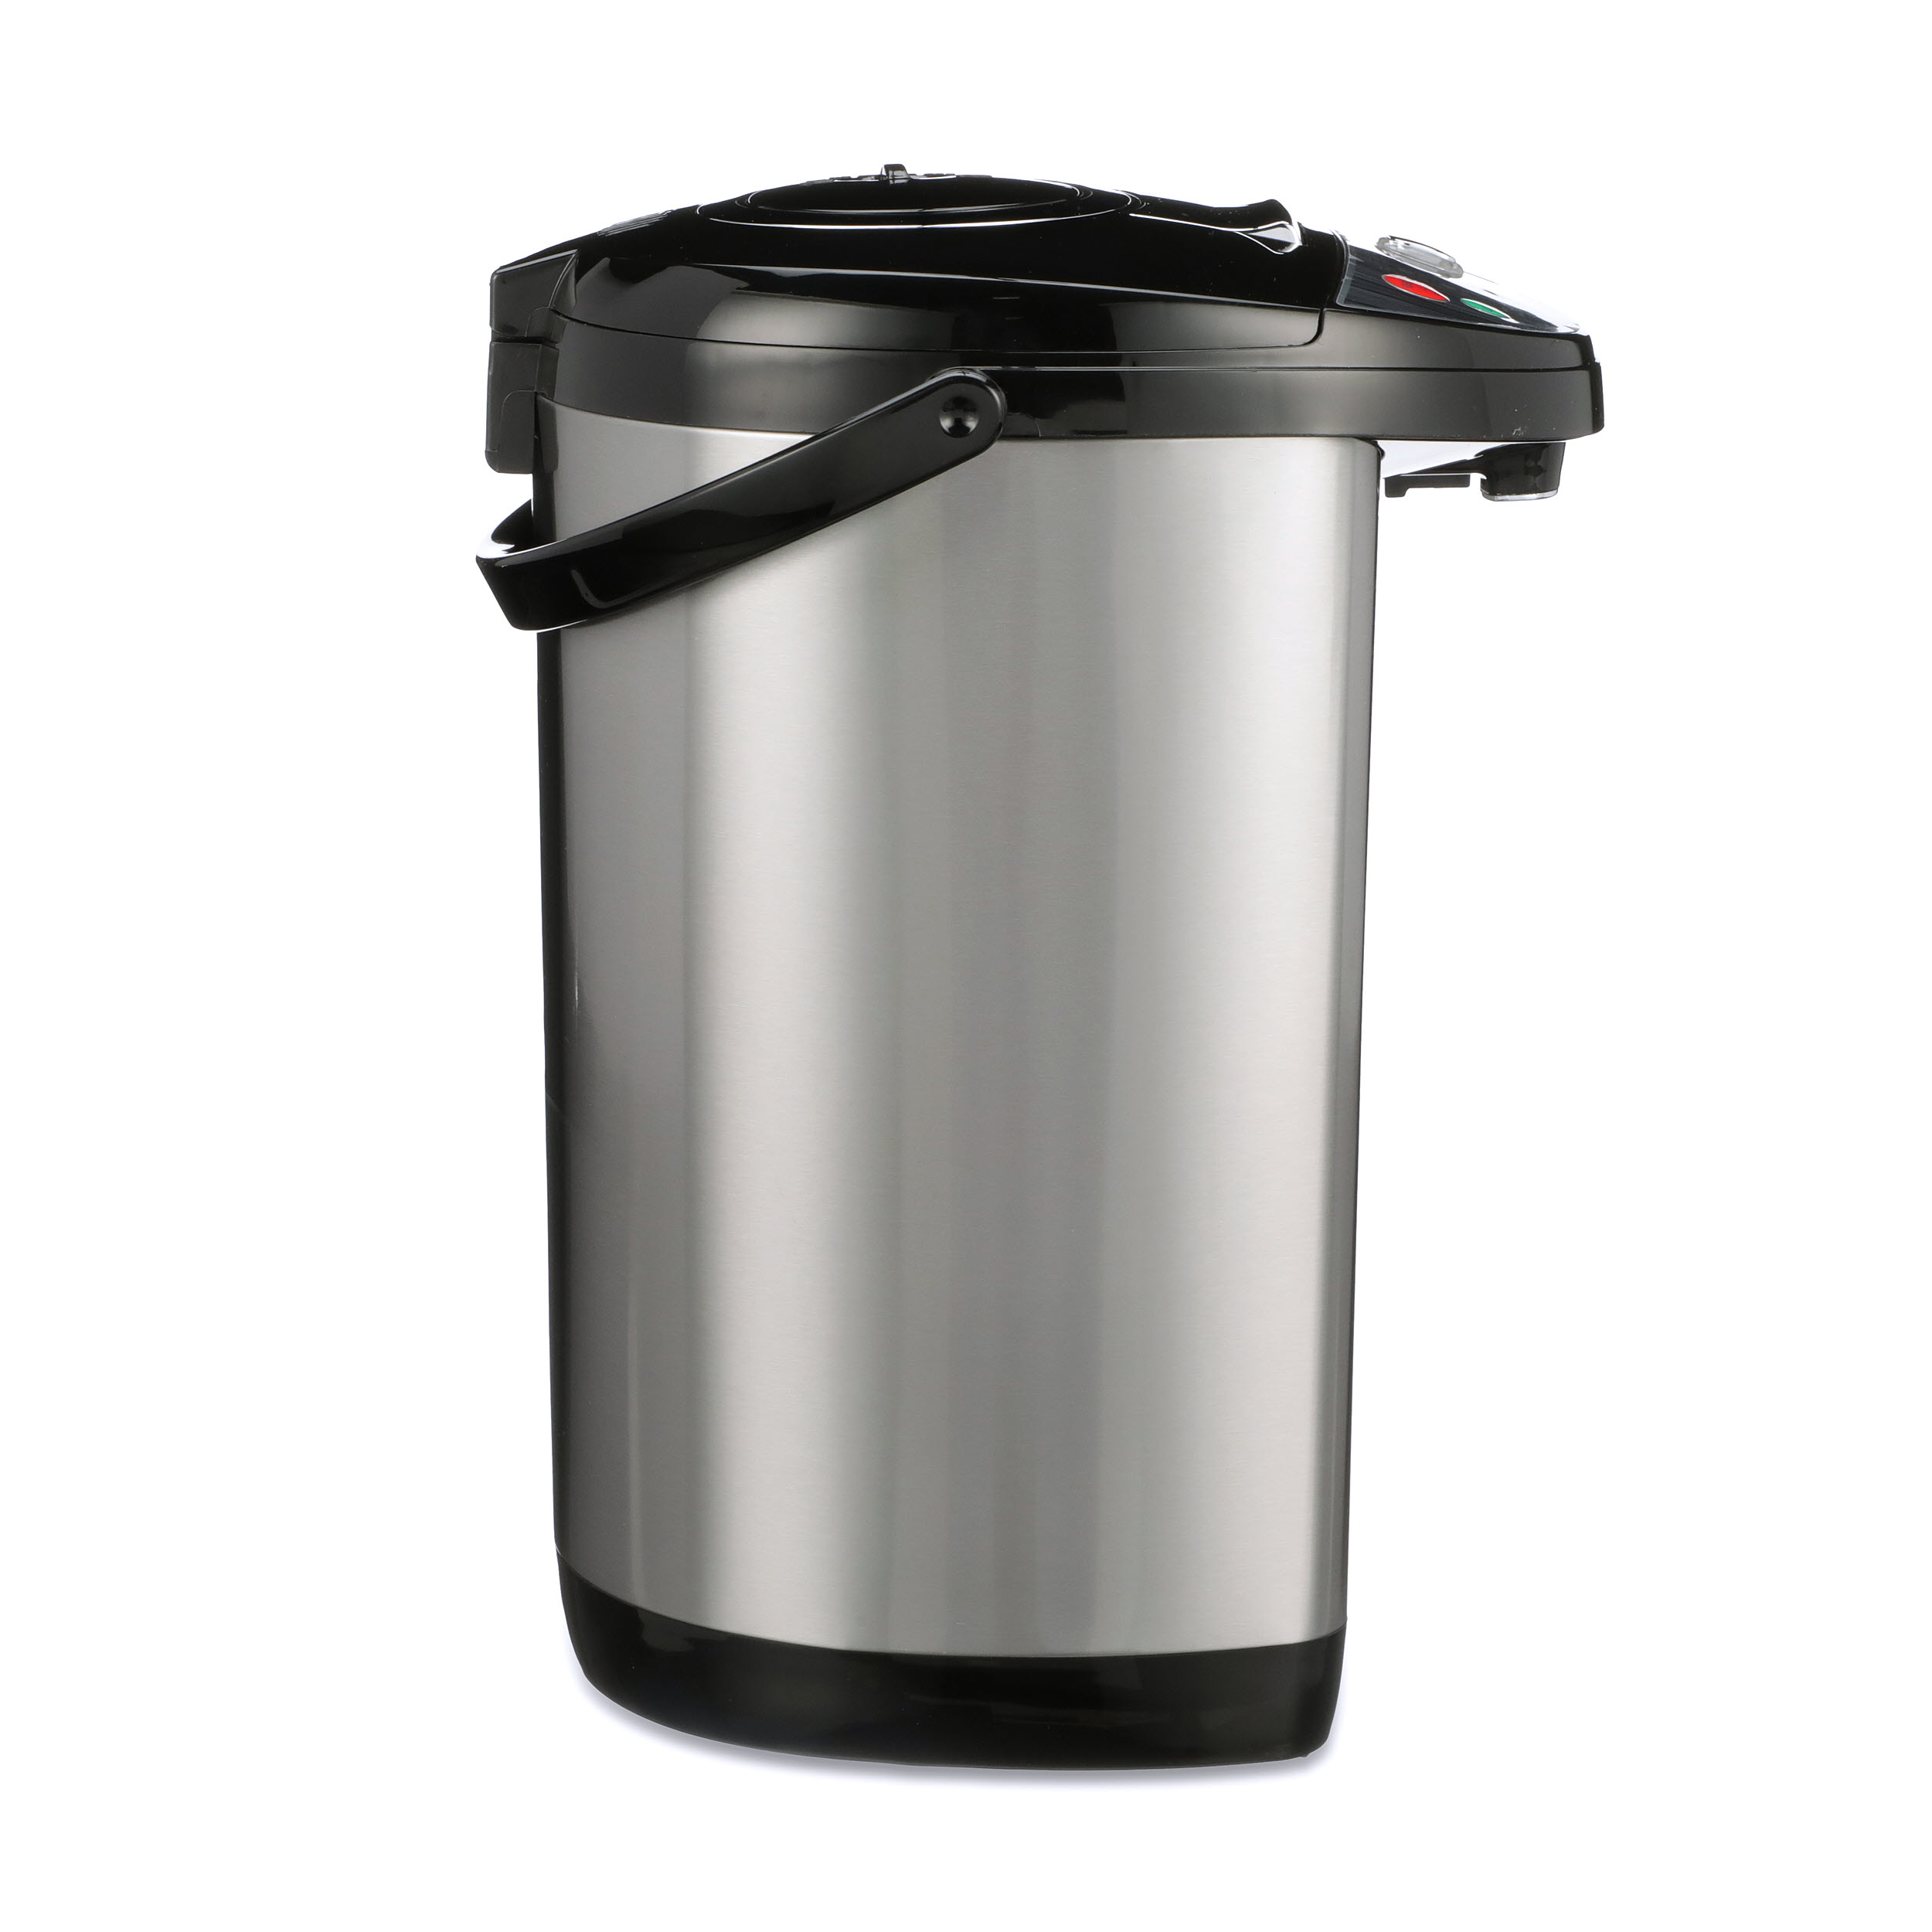 Chefman Stainless Steel Electric Hot Water Pot with Safety Lock, 5.3 L -  Kroger